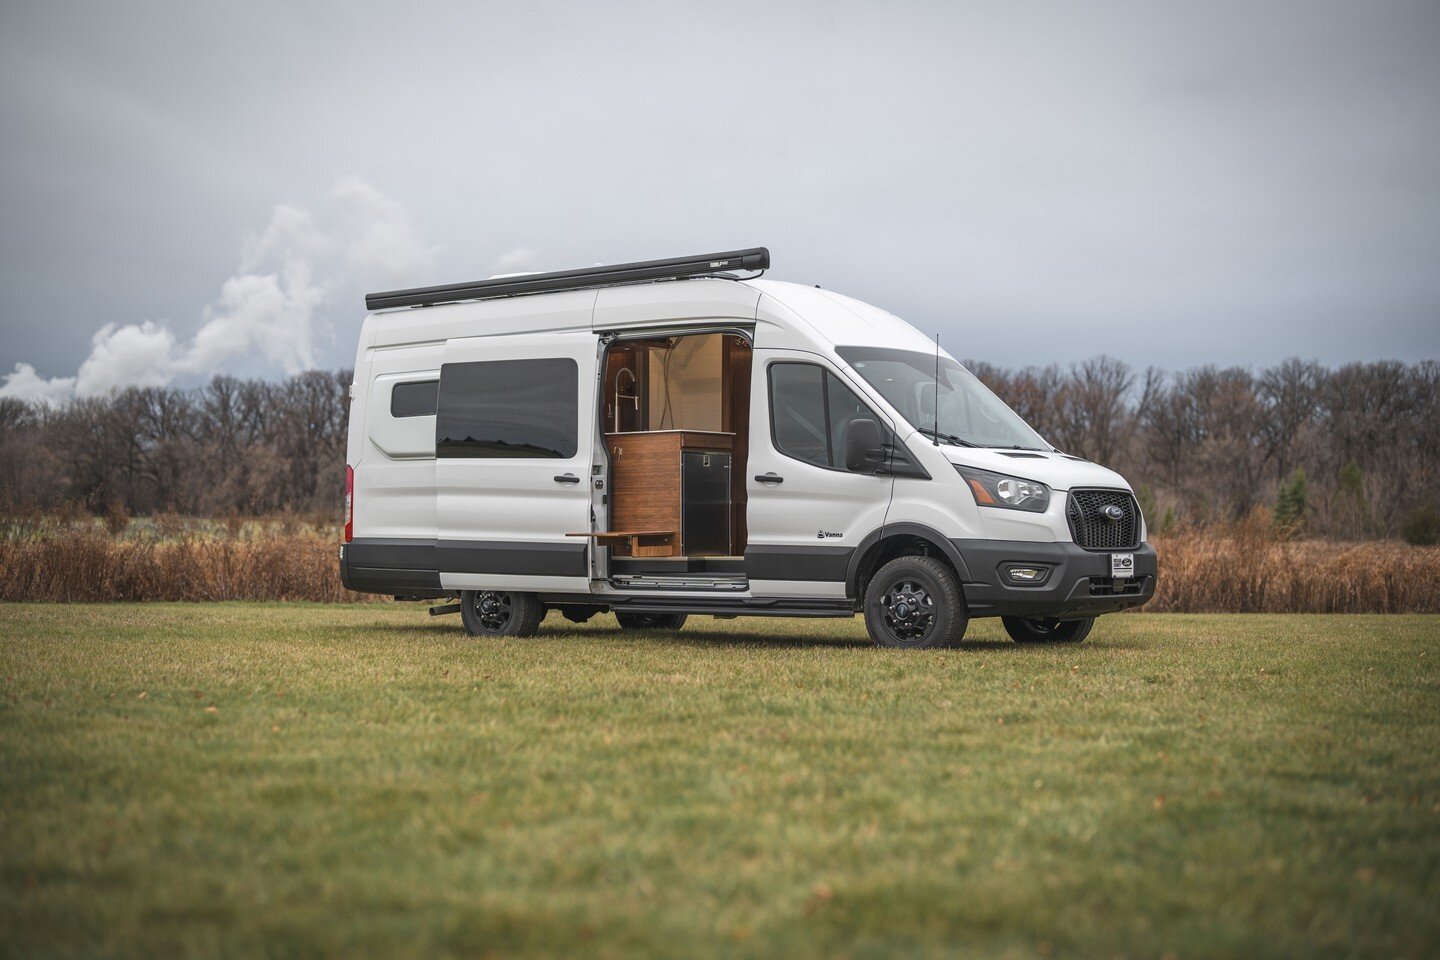 This client-designed Vanna van is headed home to Minnesota! This couple desired to travel with a small footprint, any time of the year. We hope they love this van as much as we loved building it!